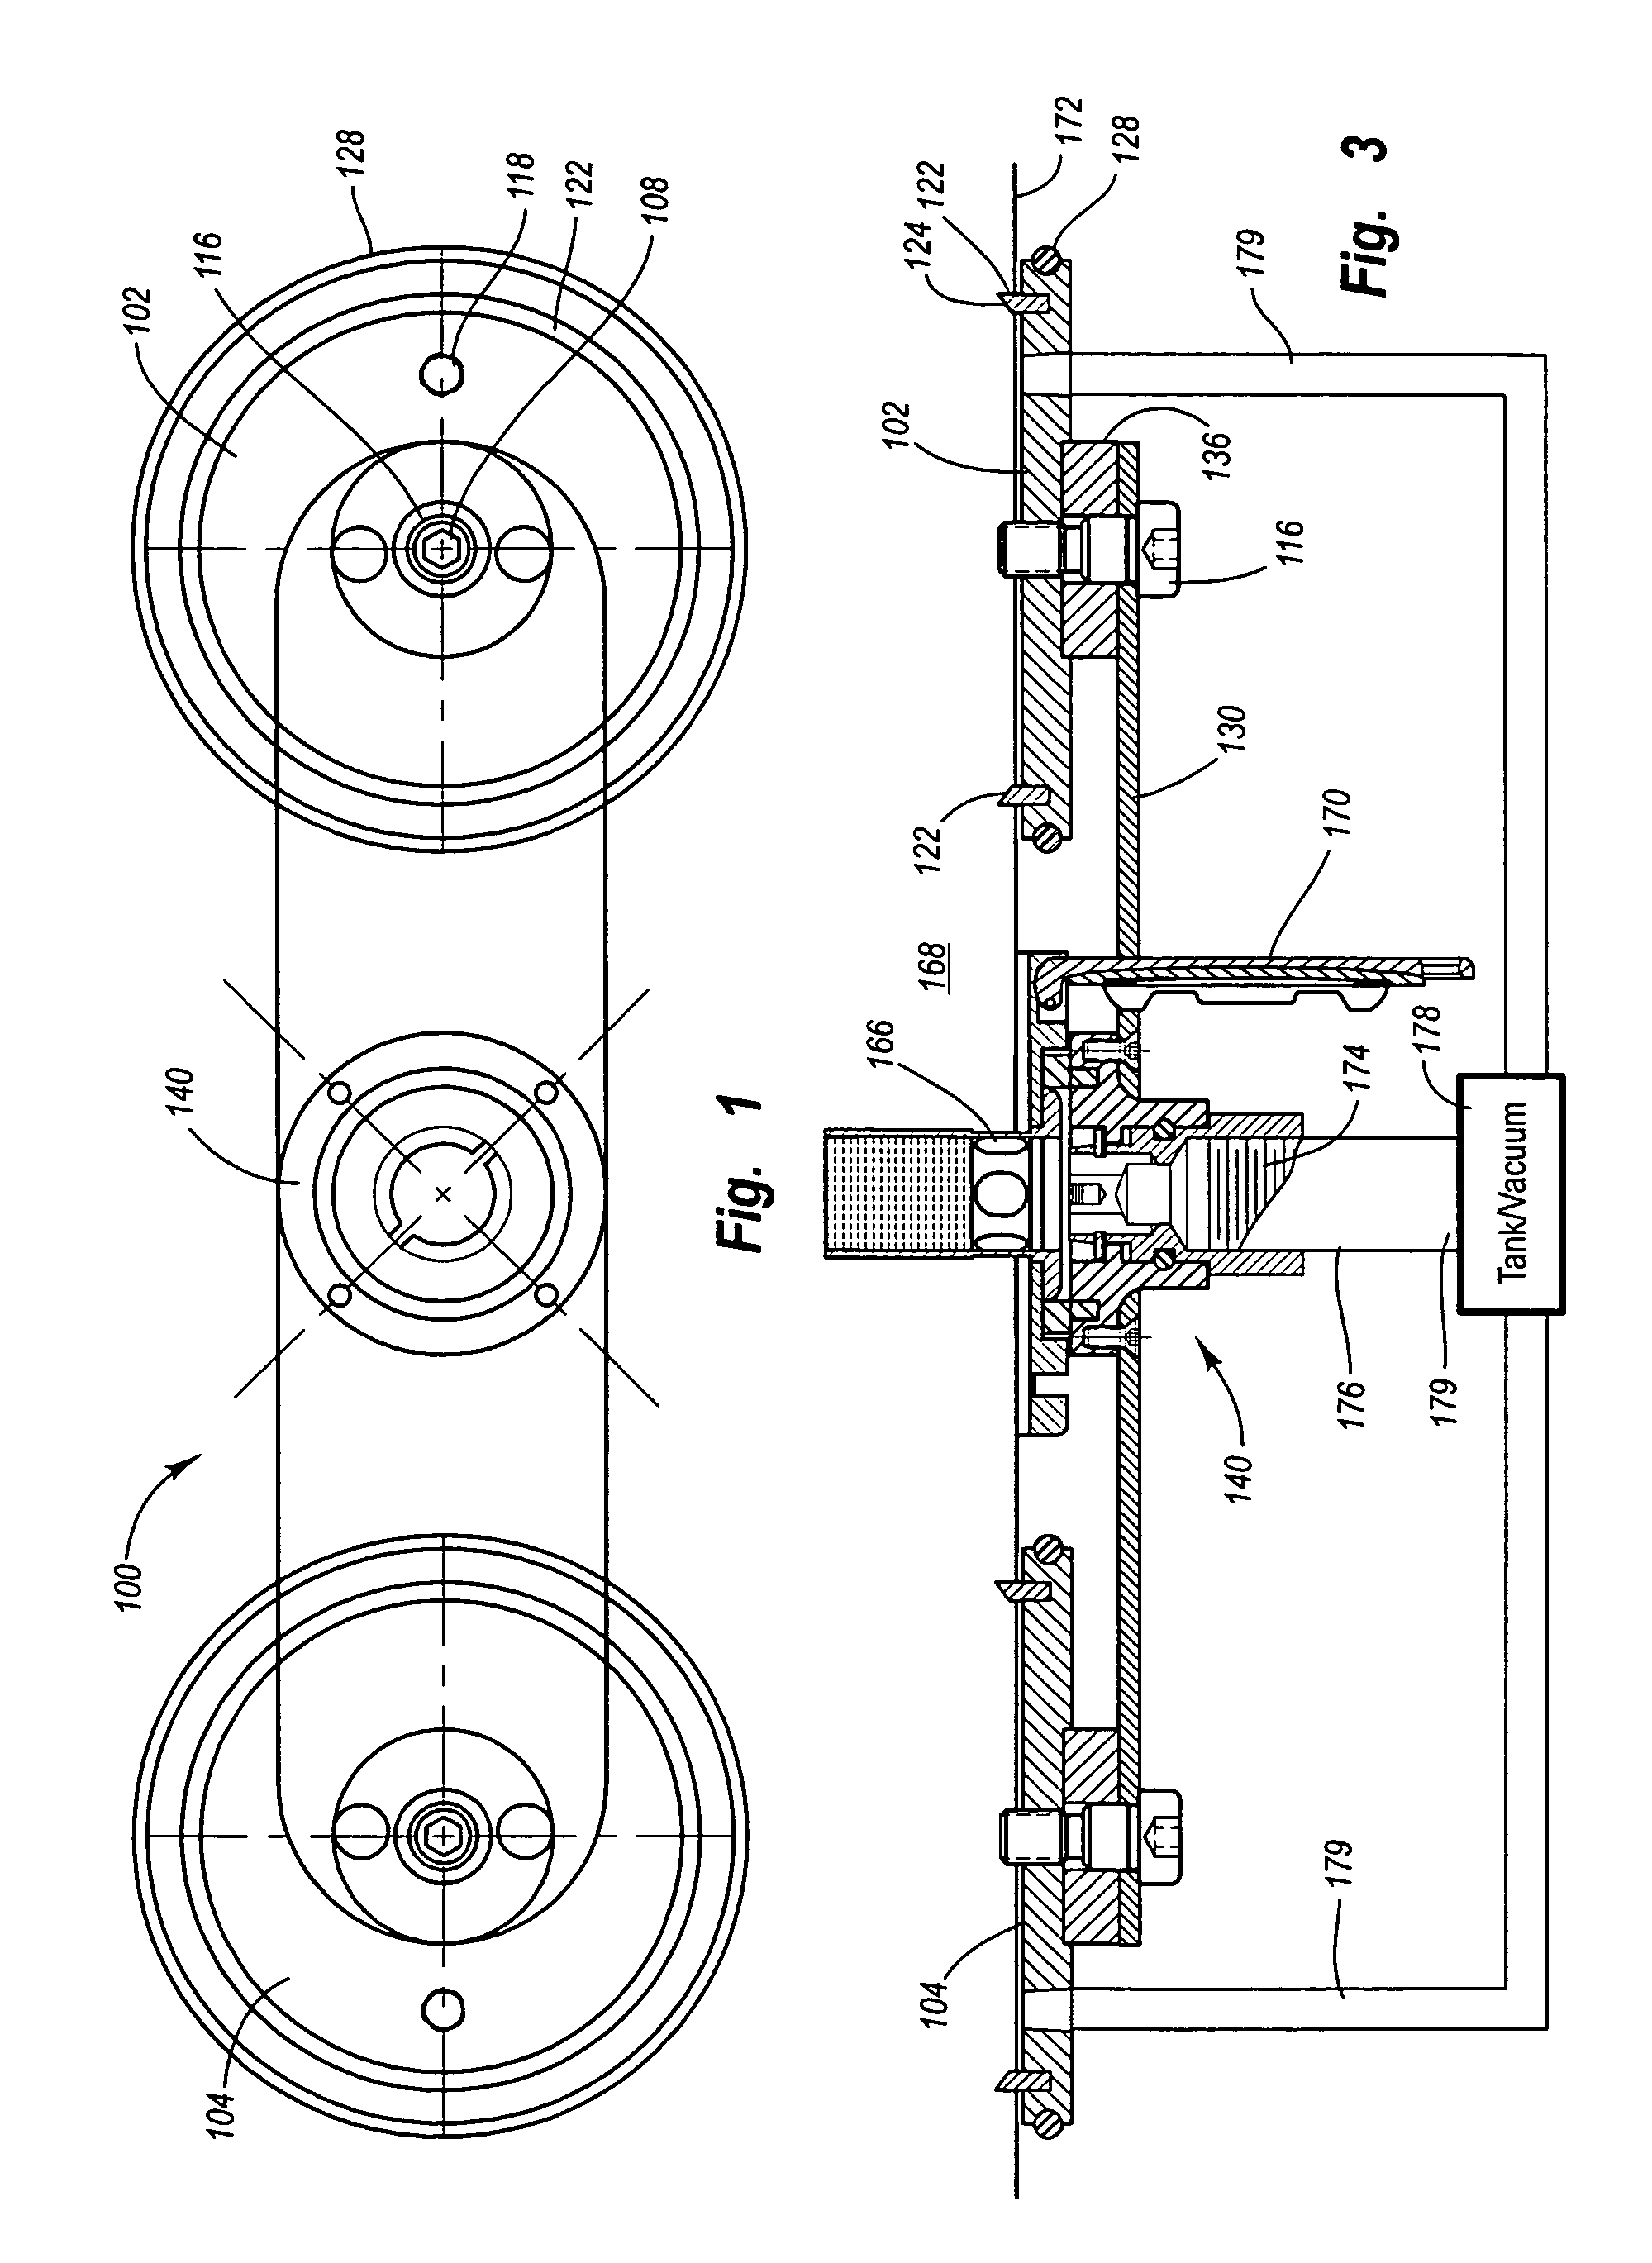 Aircraft defueling apparatus and method